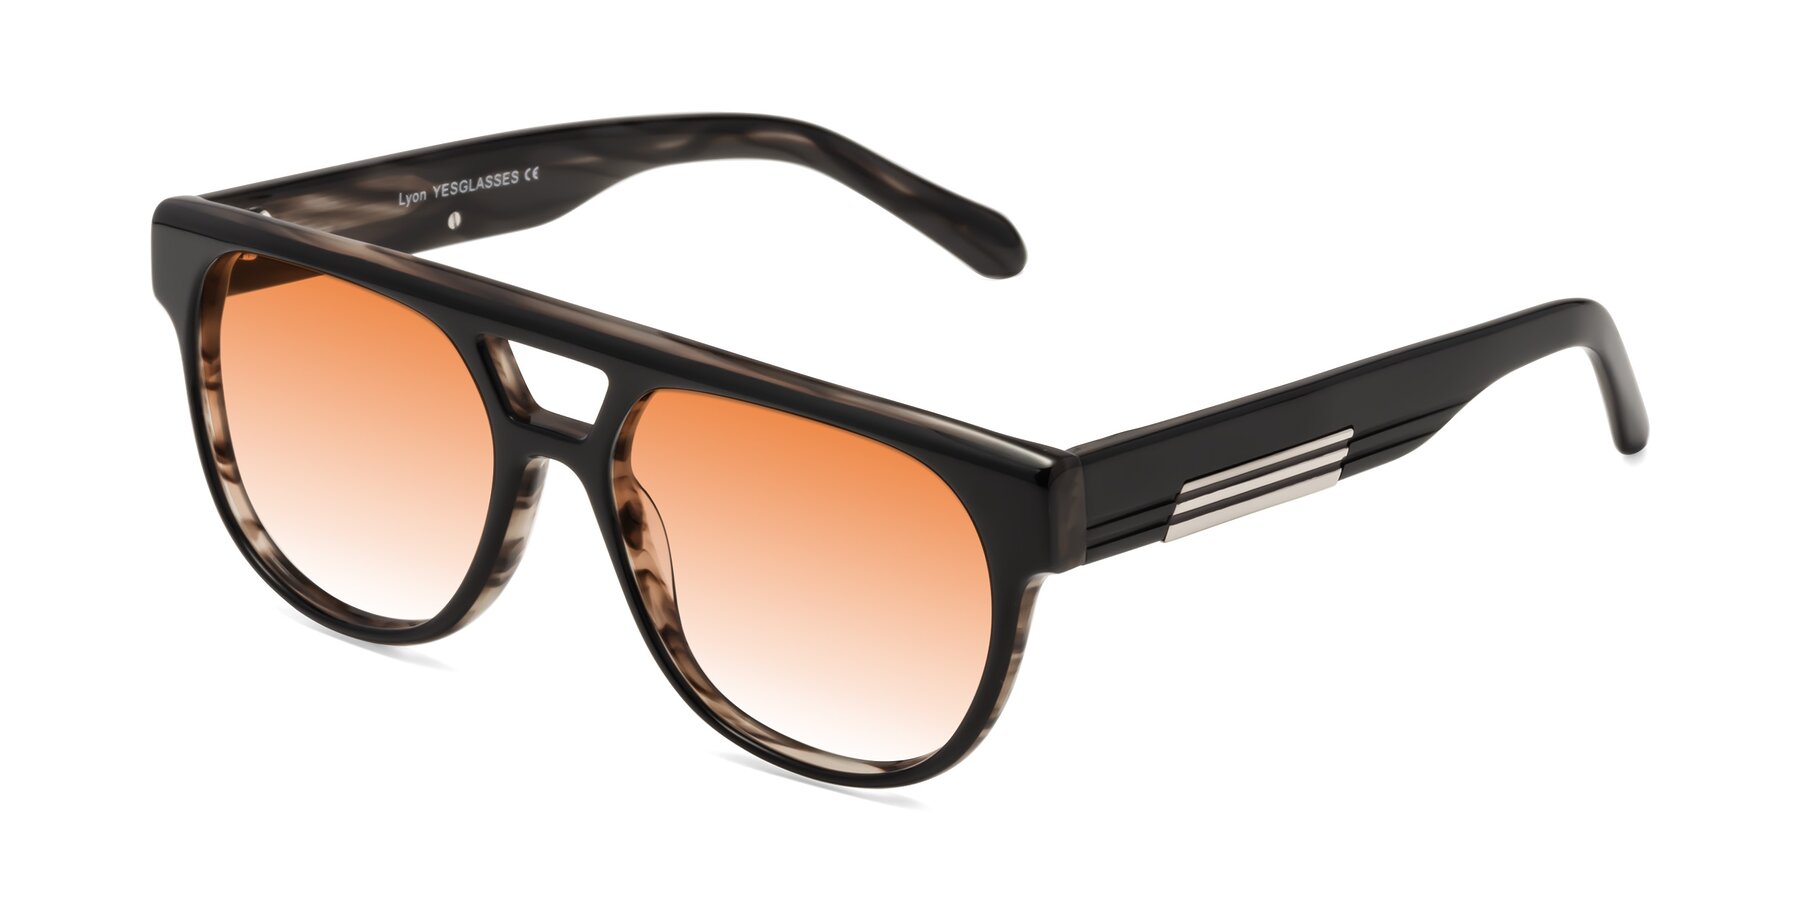 Angle of Lyon in Black-Brown with Orange Gradient Lenses